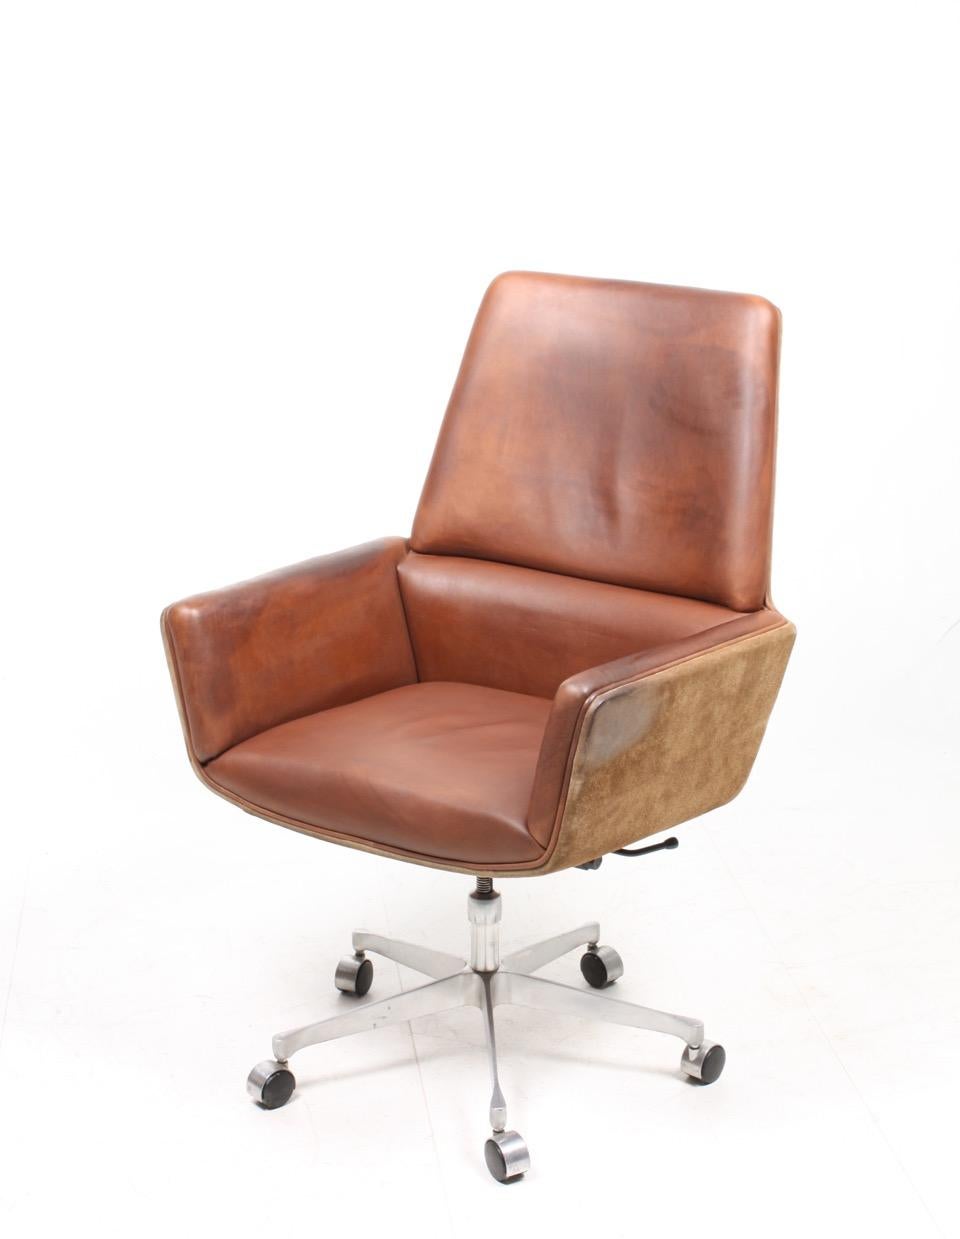 Midcentury Desk Chair in Suede and Leather by Finn Juhl 1